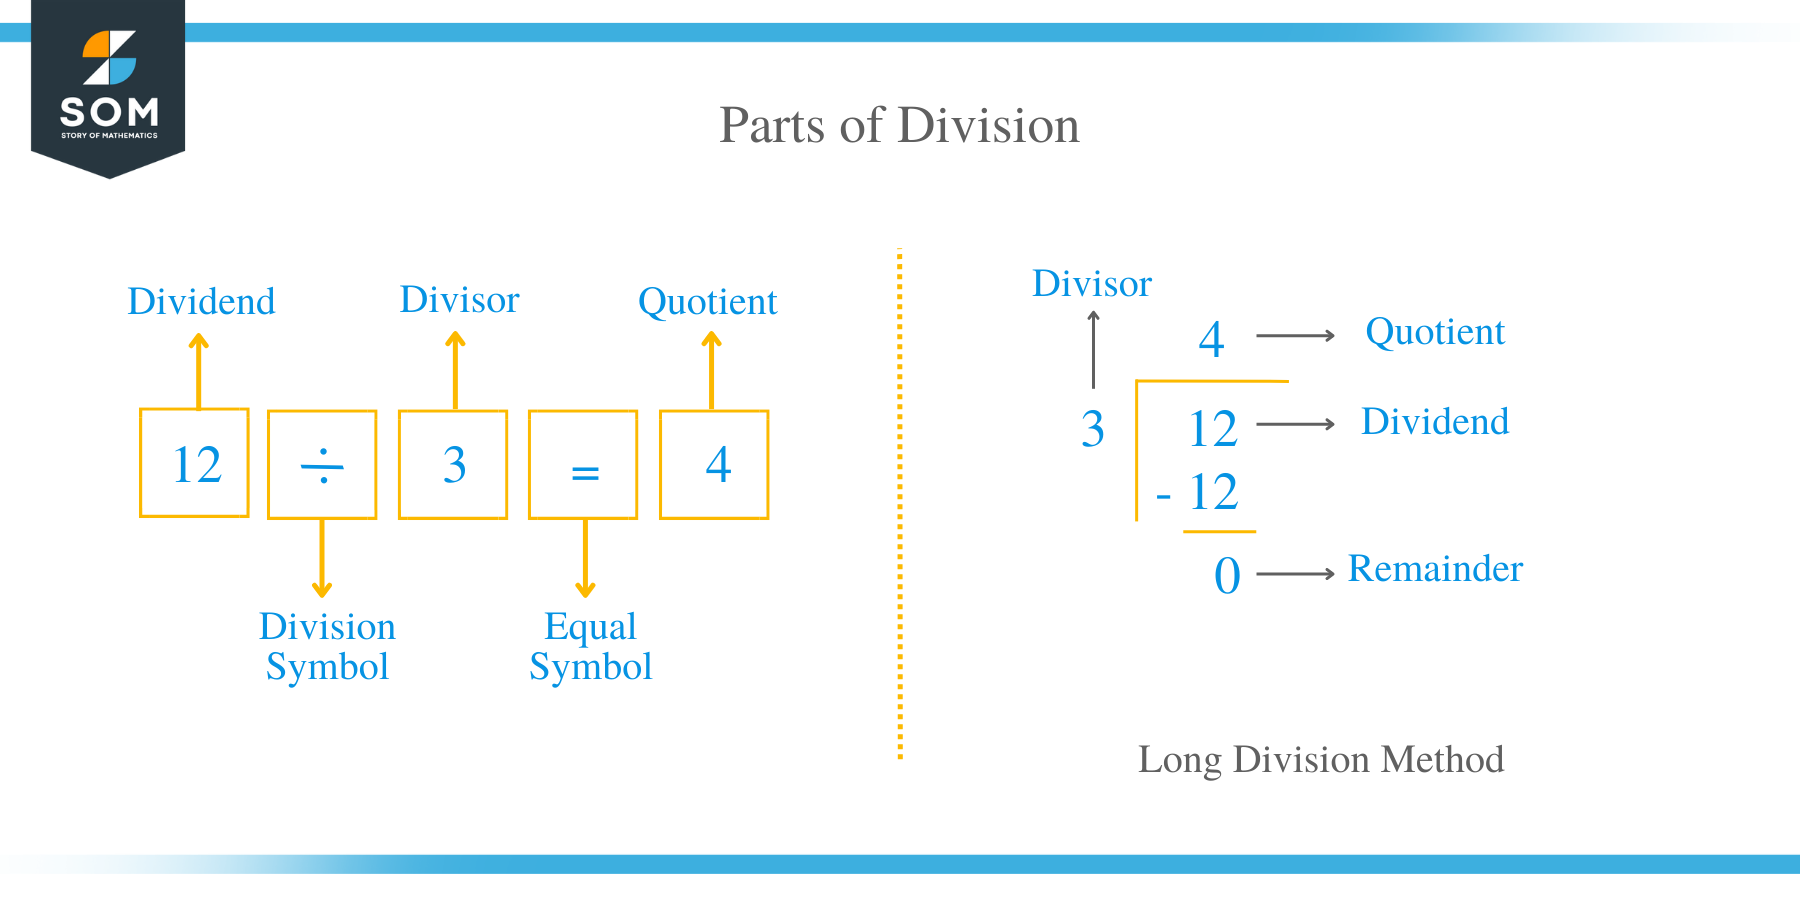 Parts of Division